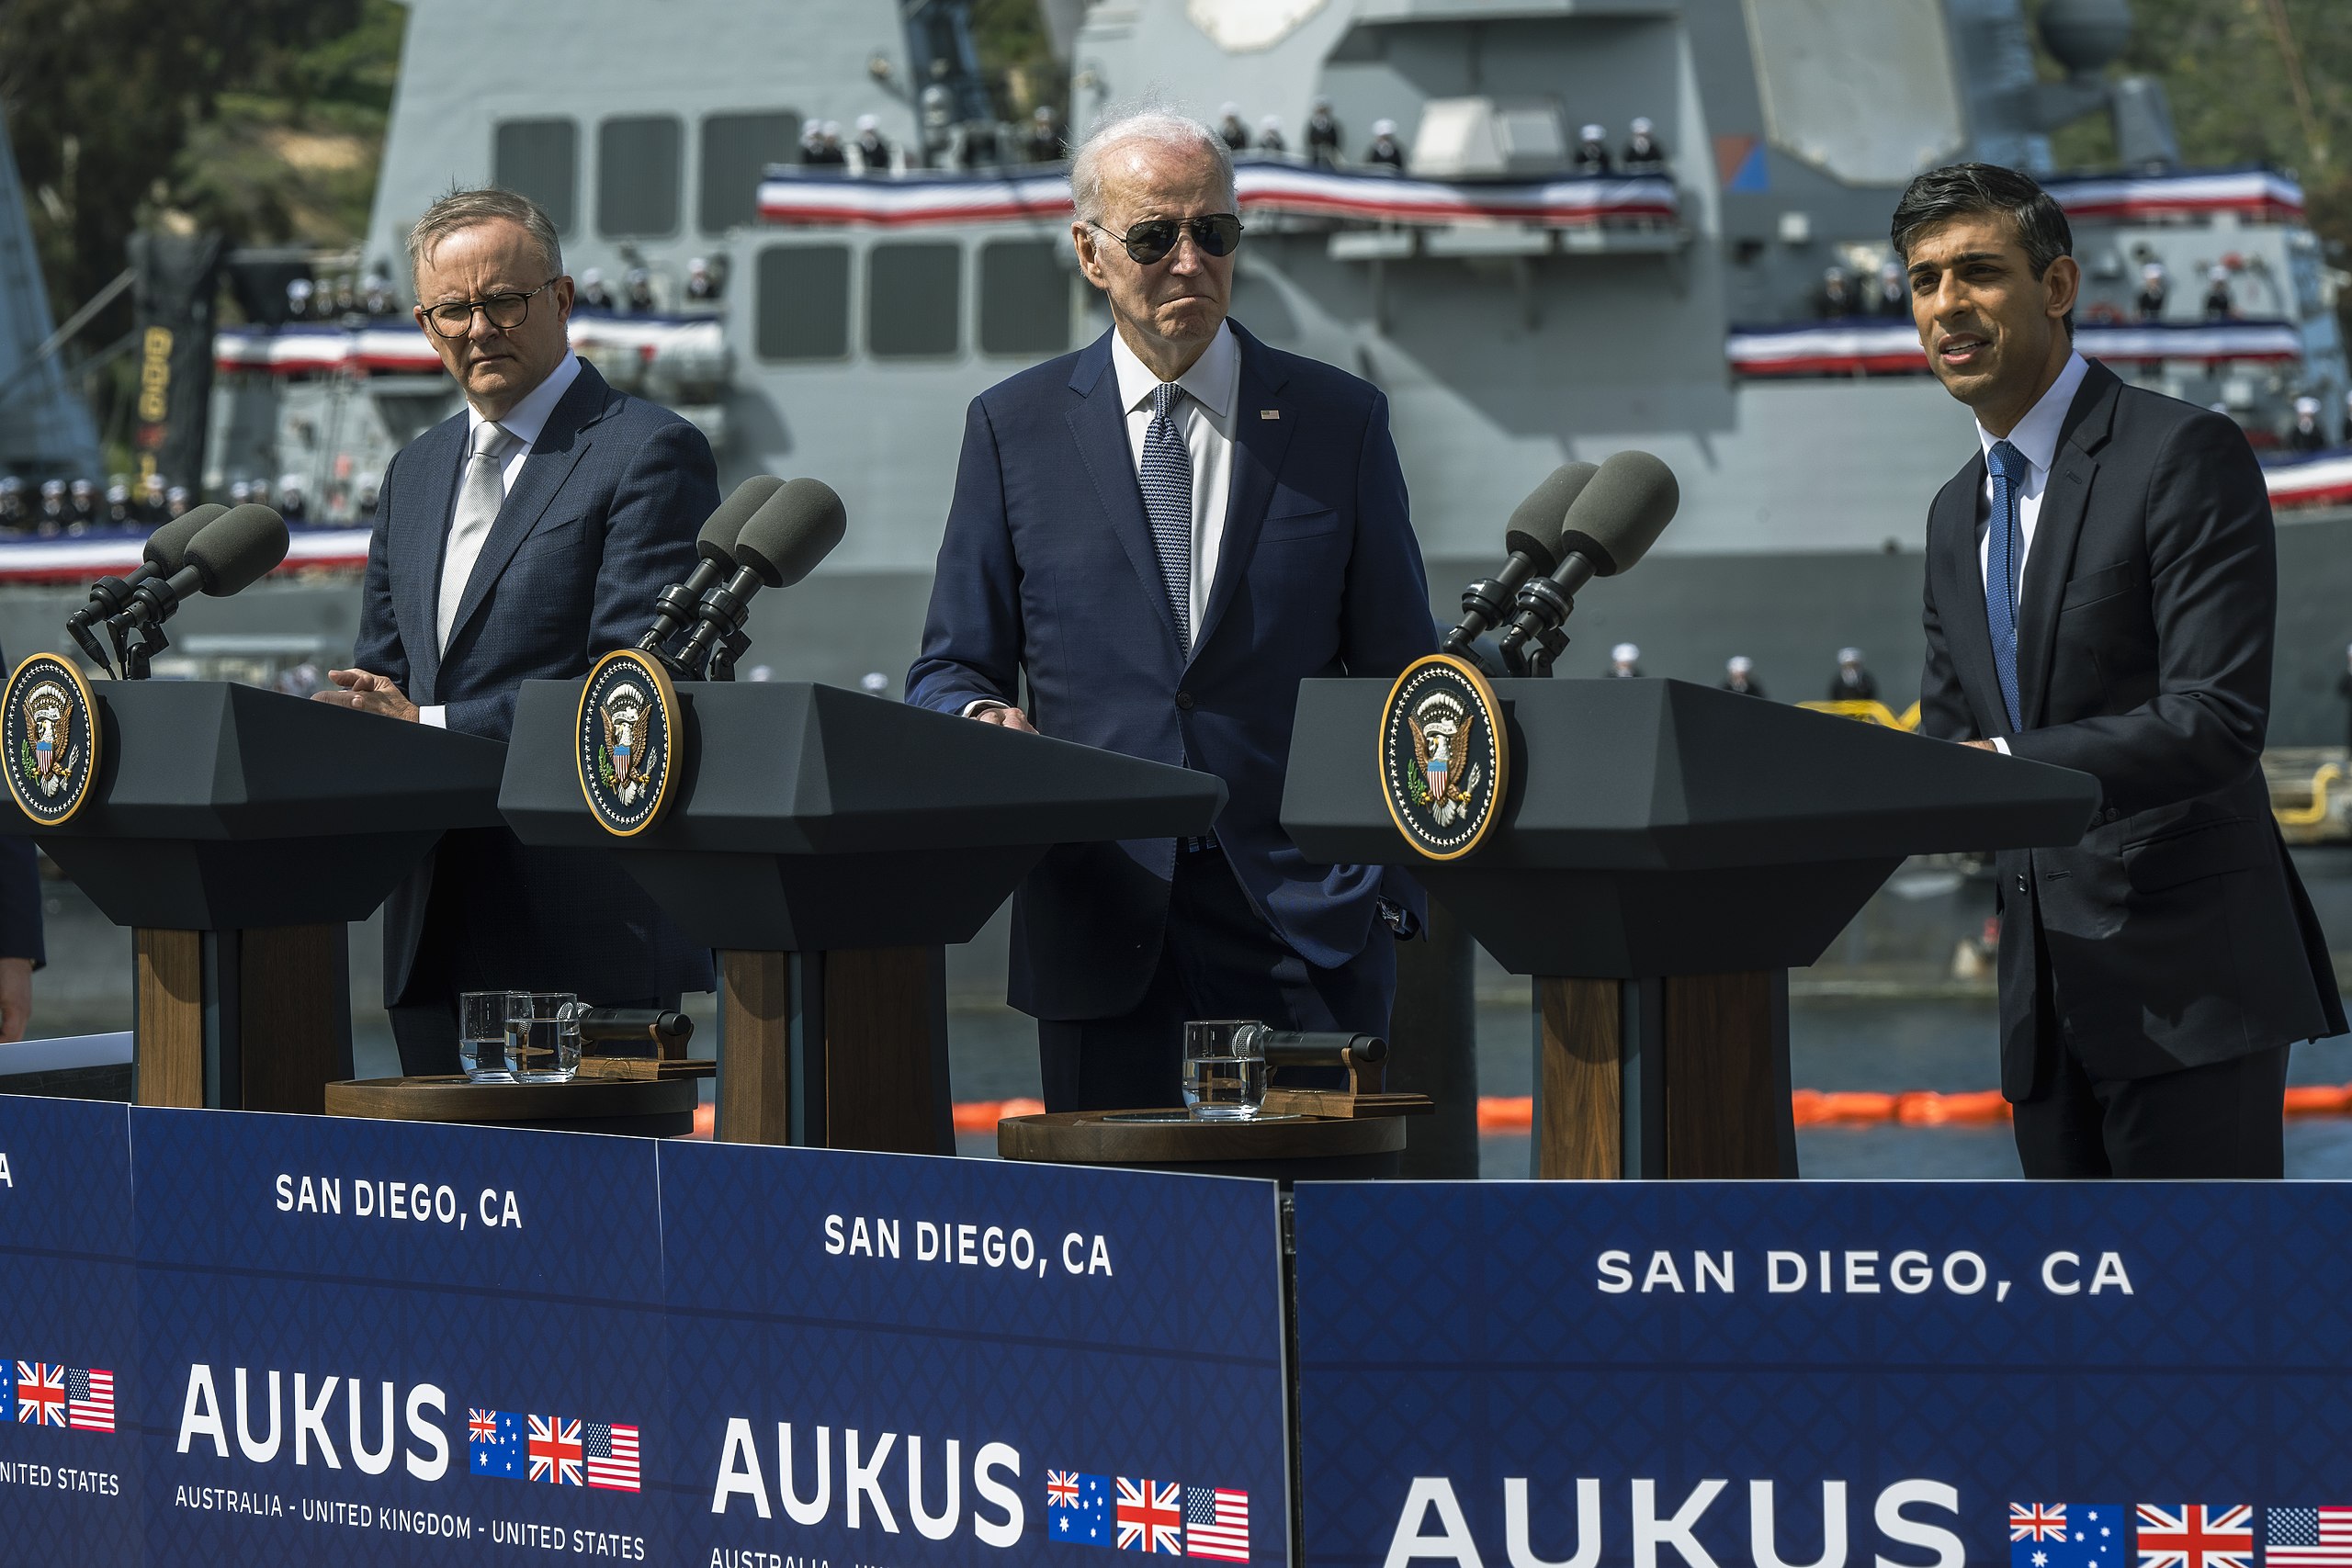 AUKUS After San Diego: The real challenges and nuclear risks